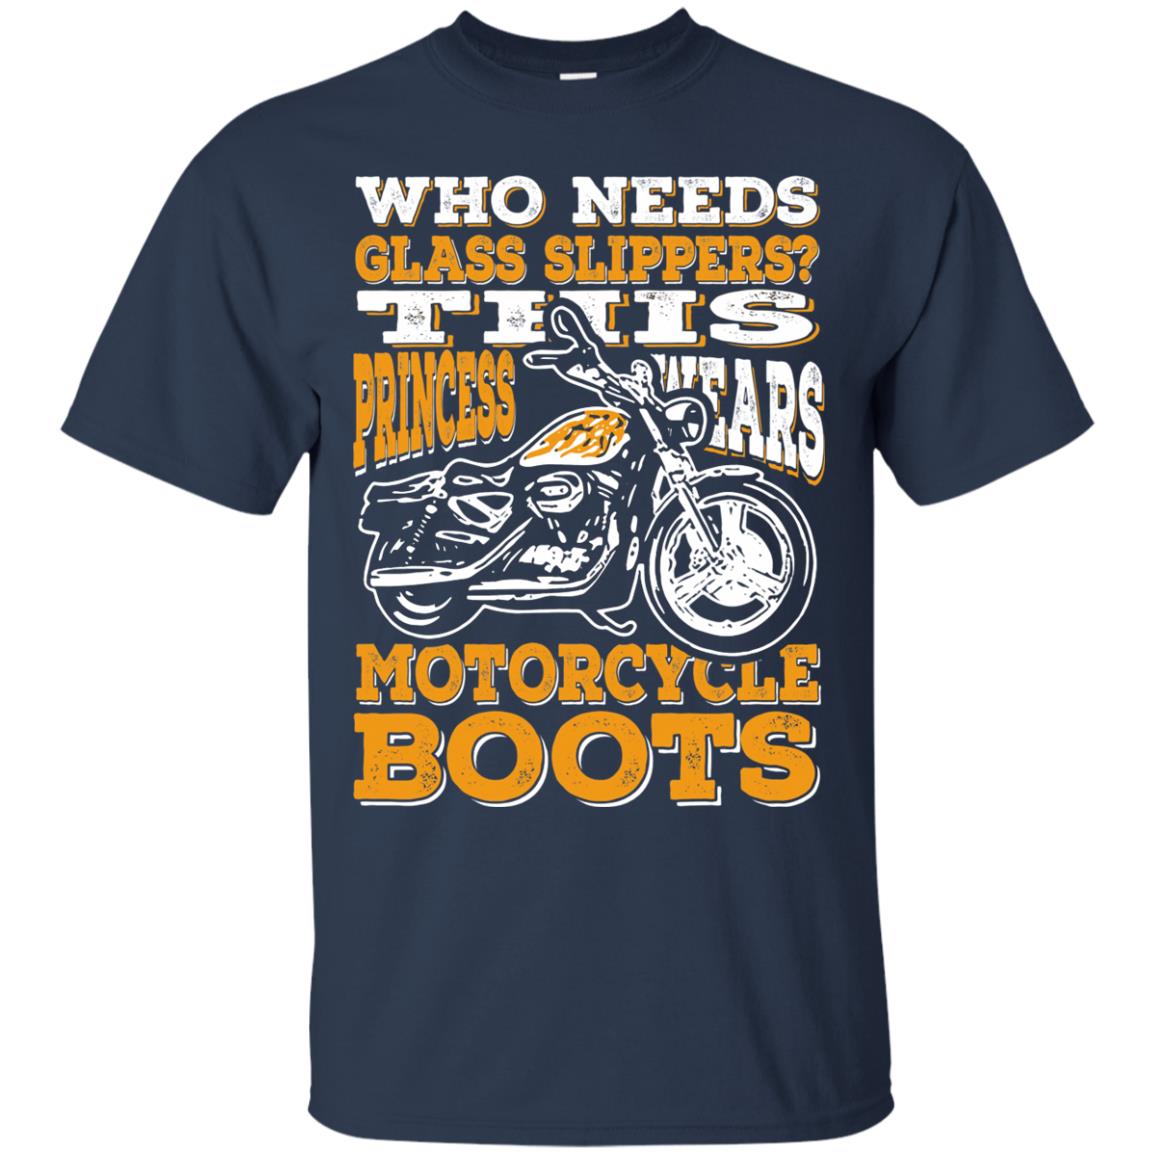 Wear Motorcycle Boots Or Slippers t shirt - navy blue